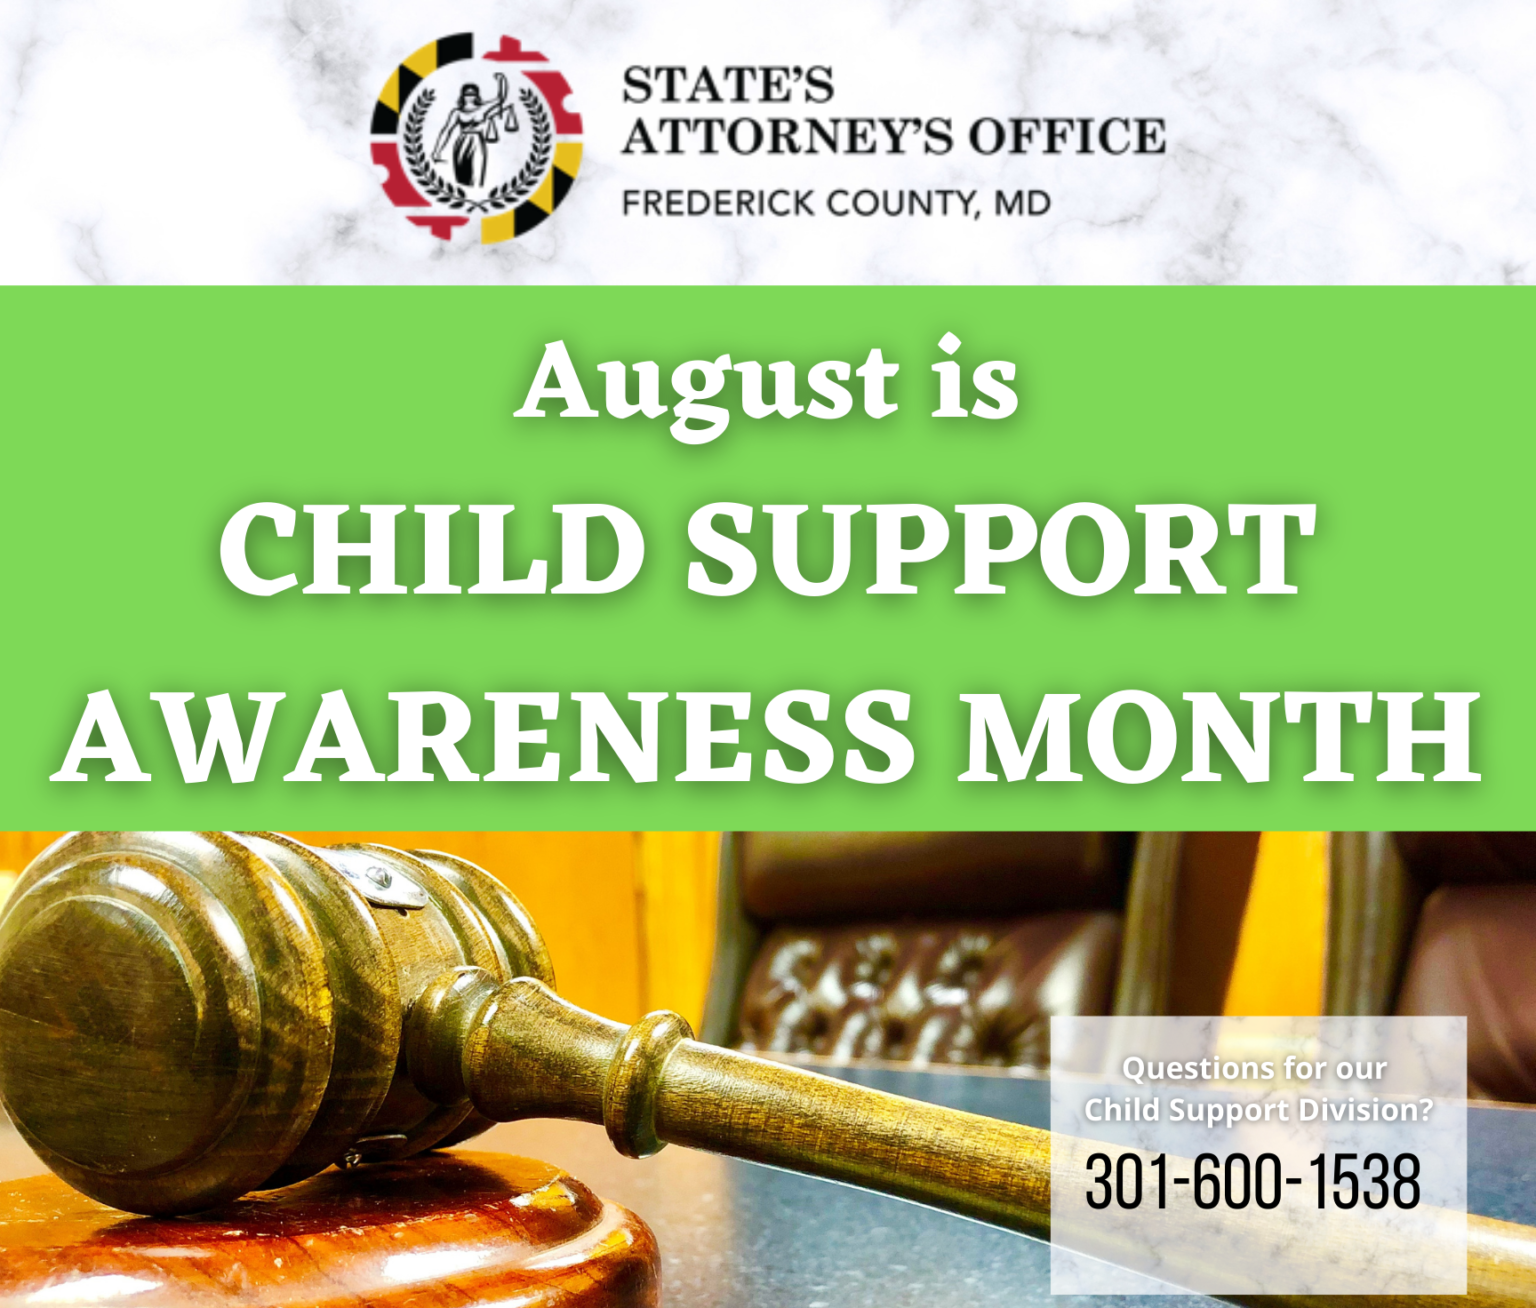 AUGUST IS CHILD SUPPORT AWARENESS MONTH Frederick County States